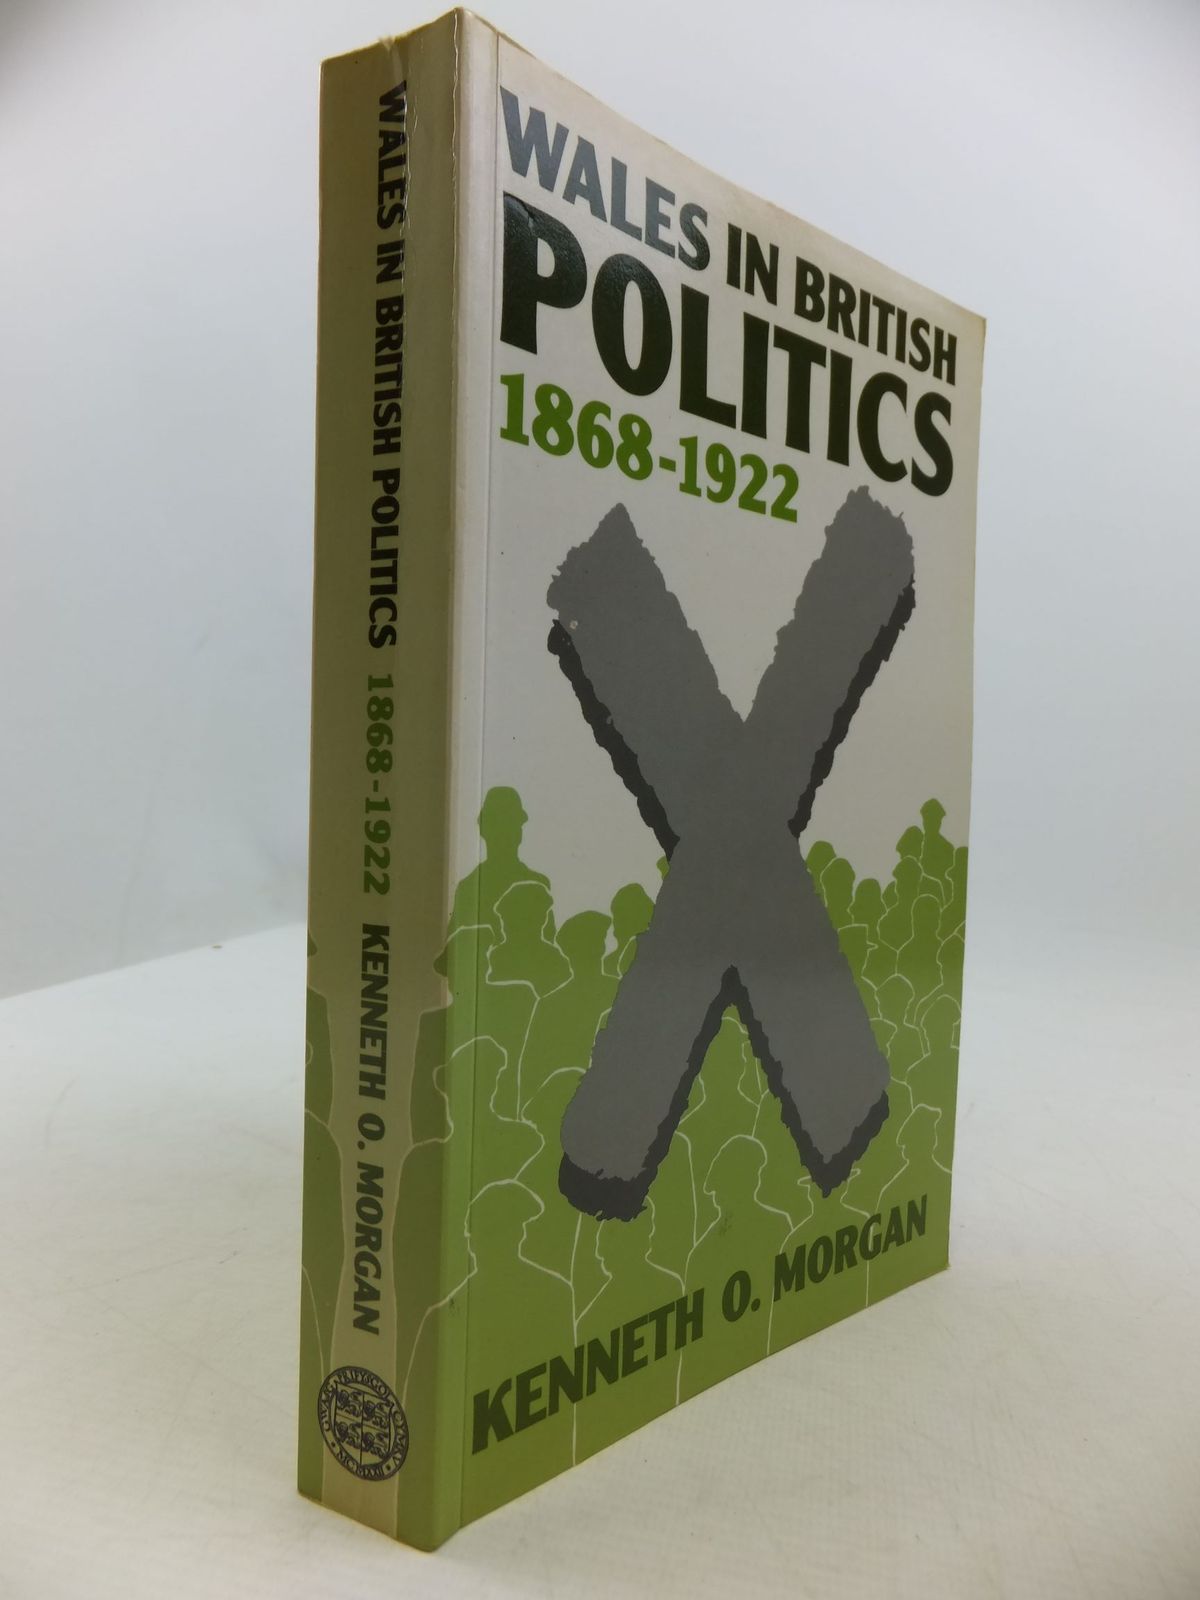 Photo of WALES IN BRITISH POLITICS 1868-1922 written by Morgan, Kenneth O. published by University of Wales (STOCK CODE: 1708357)  for sale by Stella & Rose's Books